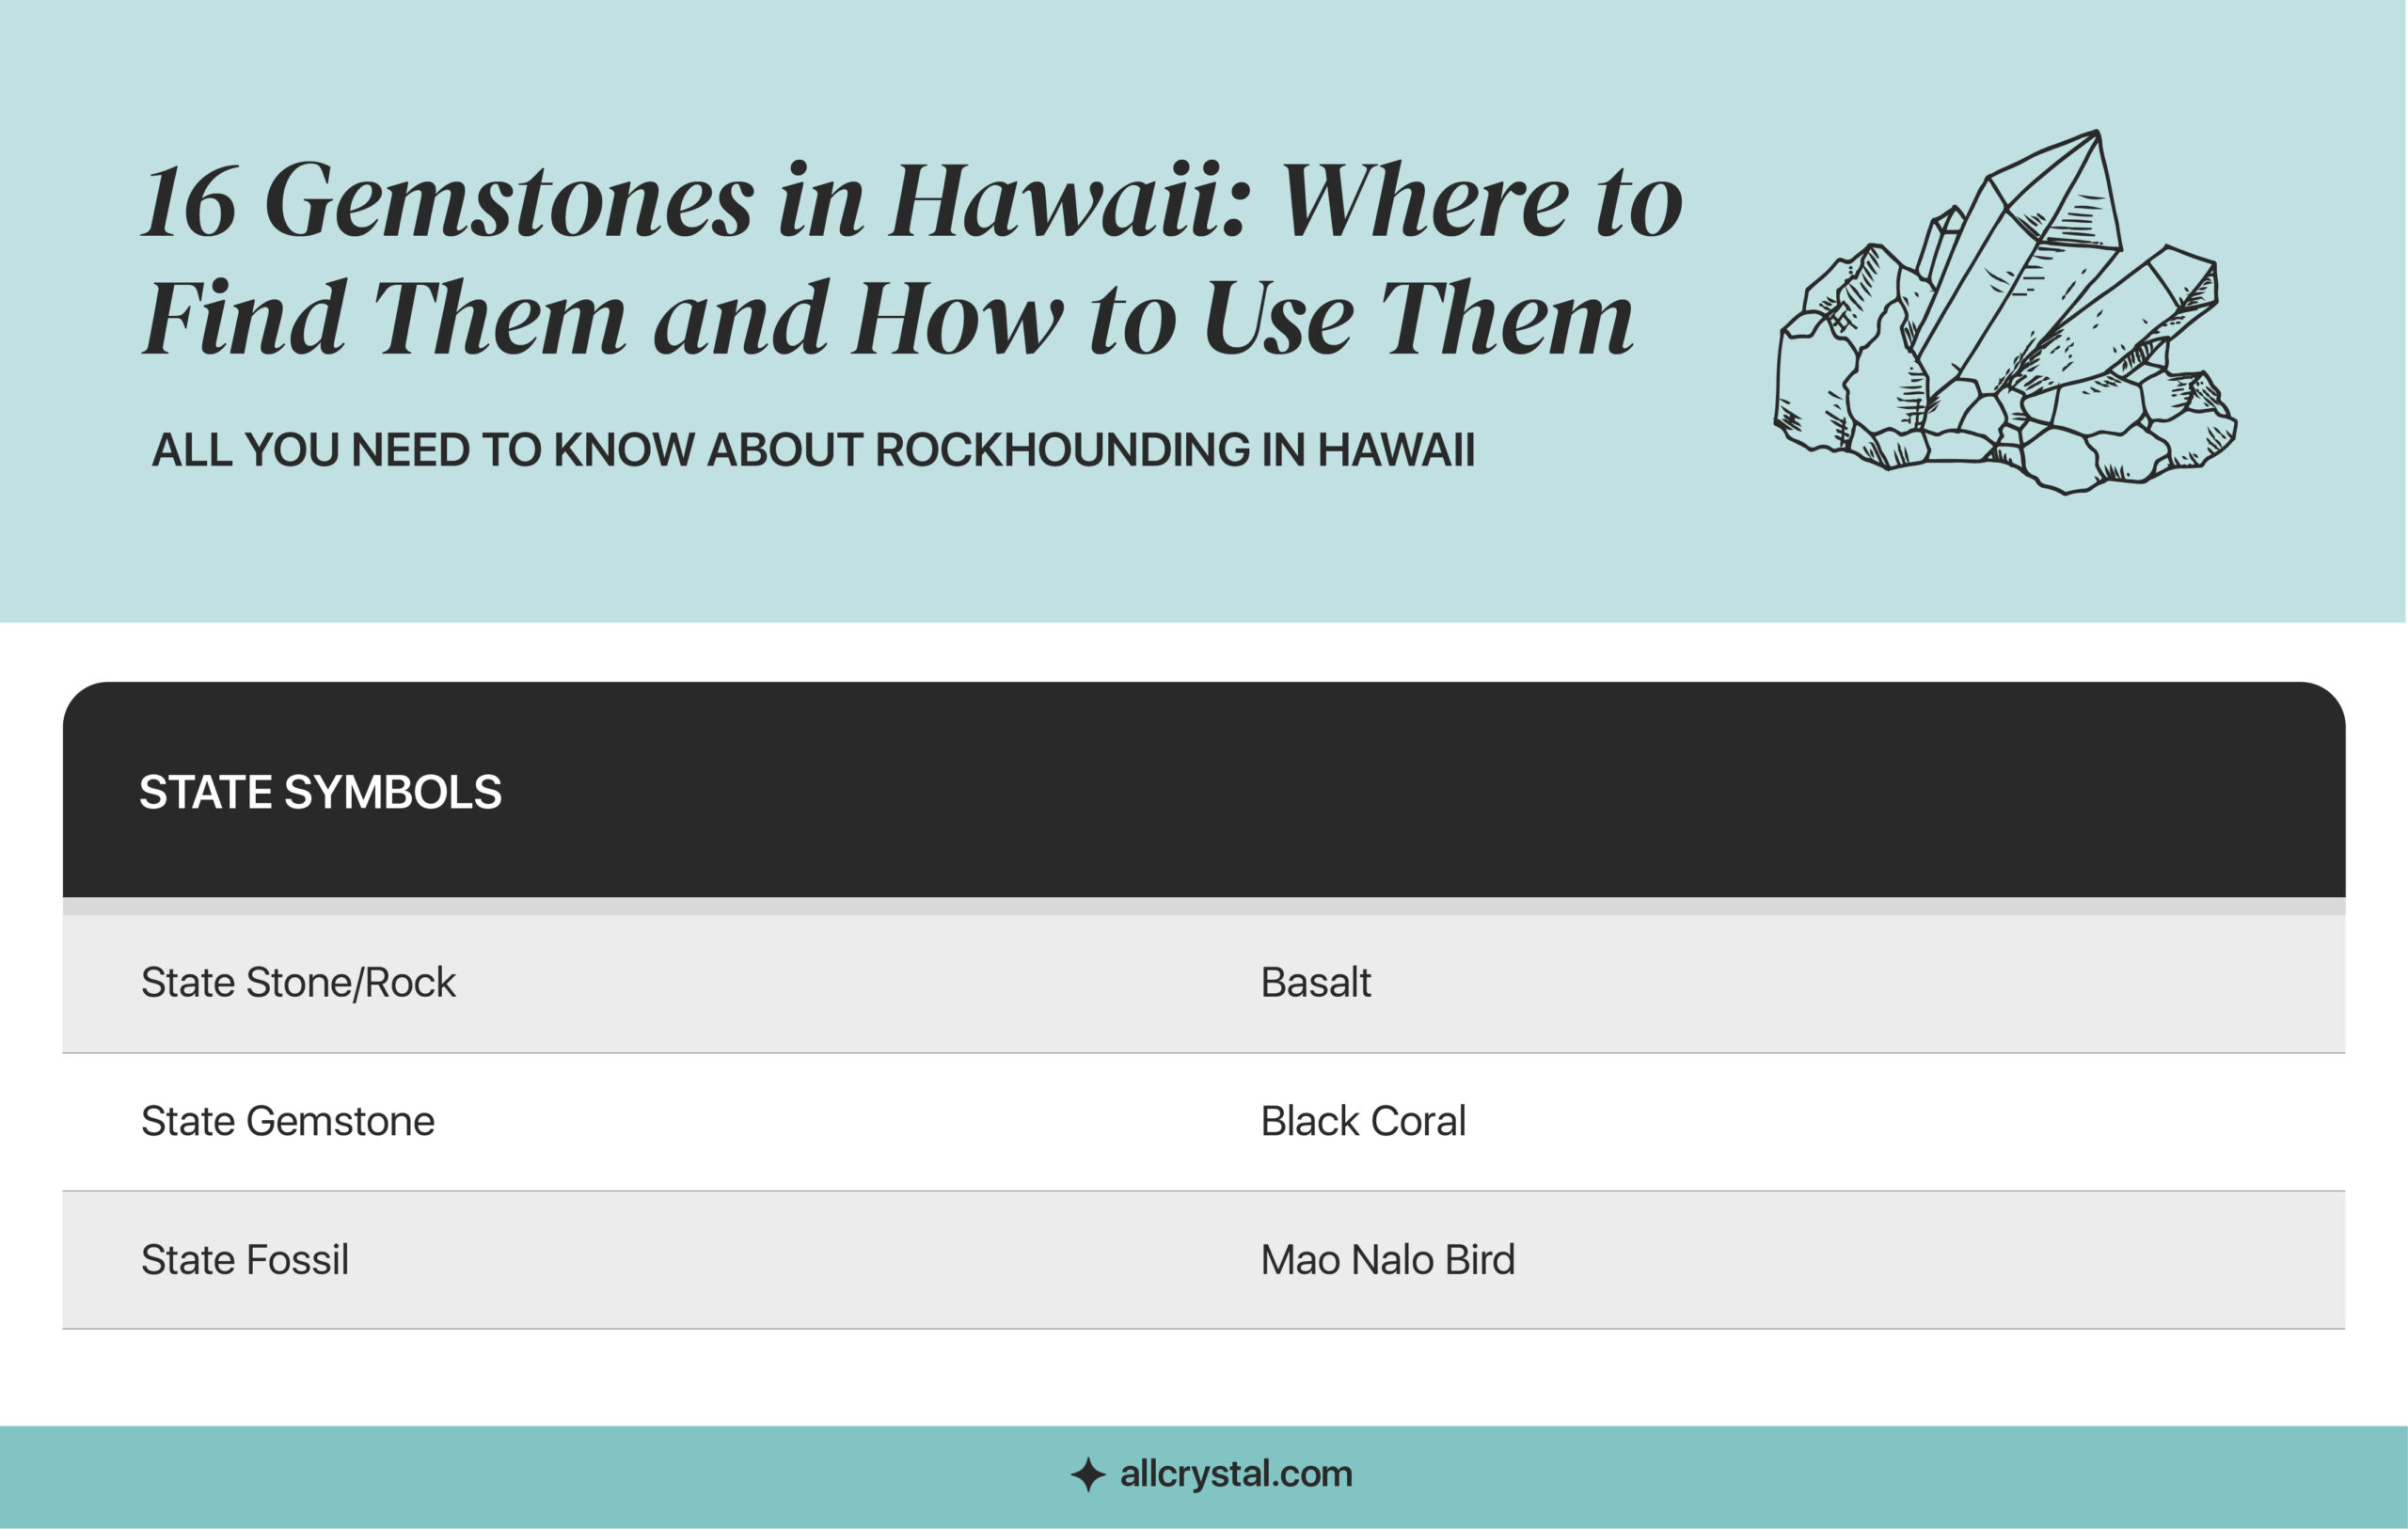 A graphic table containing information about rockhounding in Hawaii